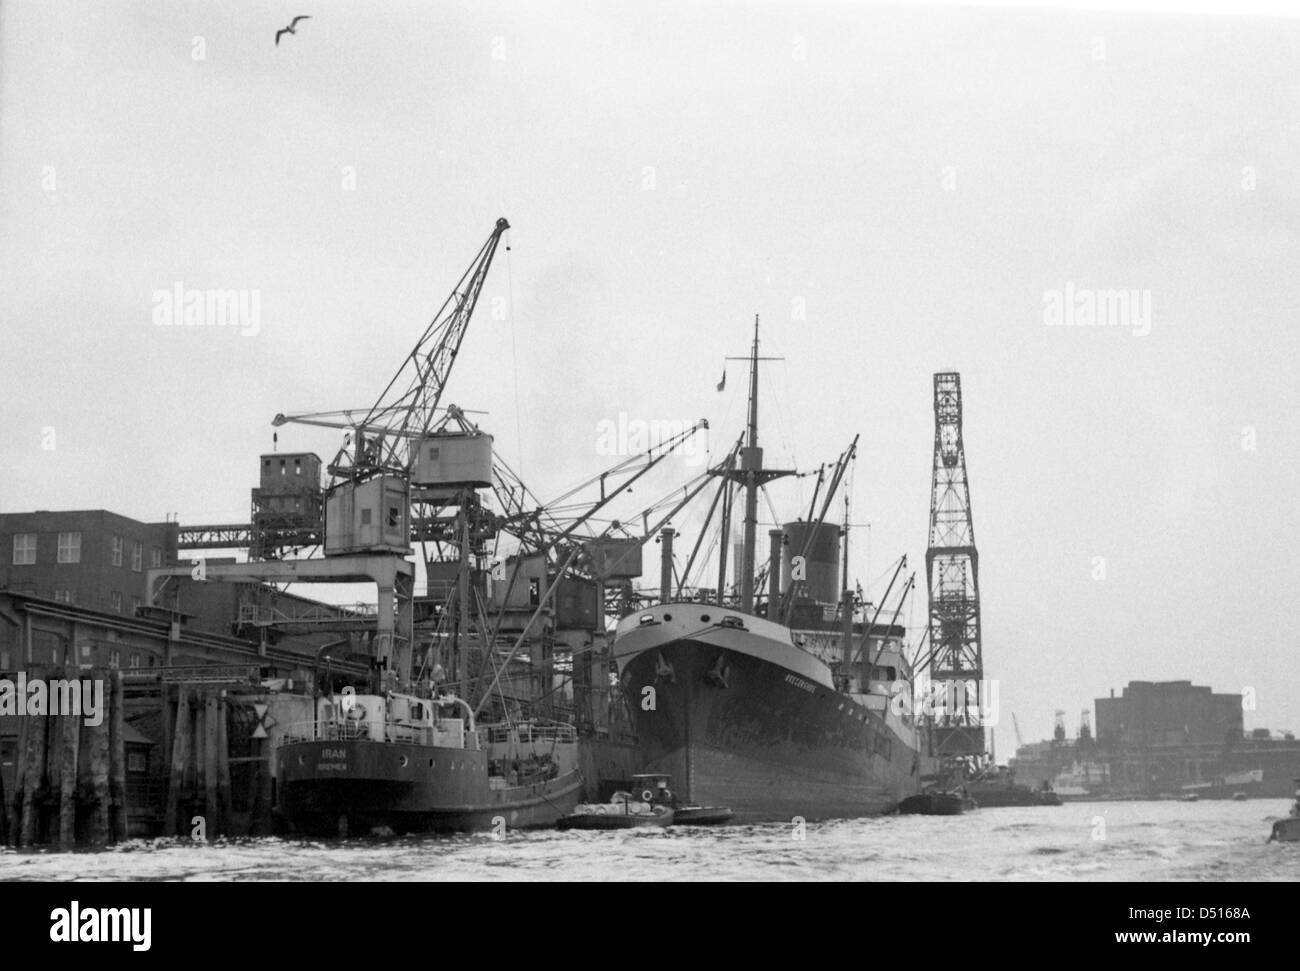 Hamburg, Germany, cargo ship at a pier with loading cranes in port Stock Photo